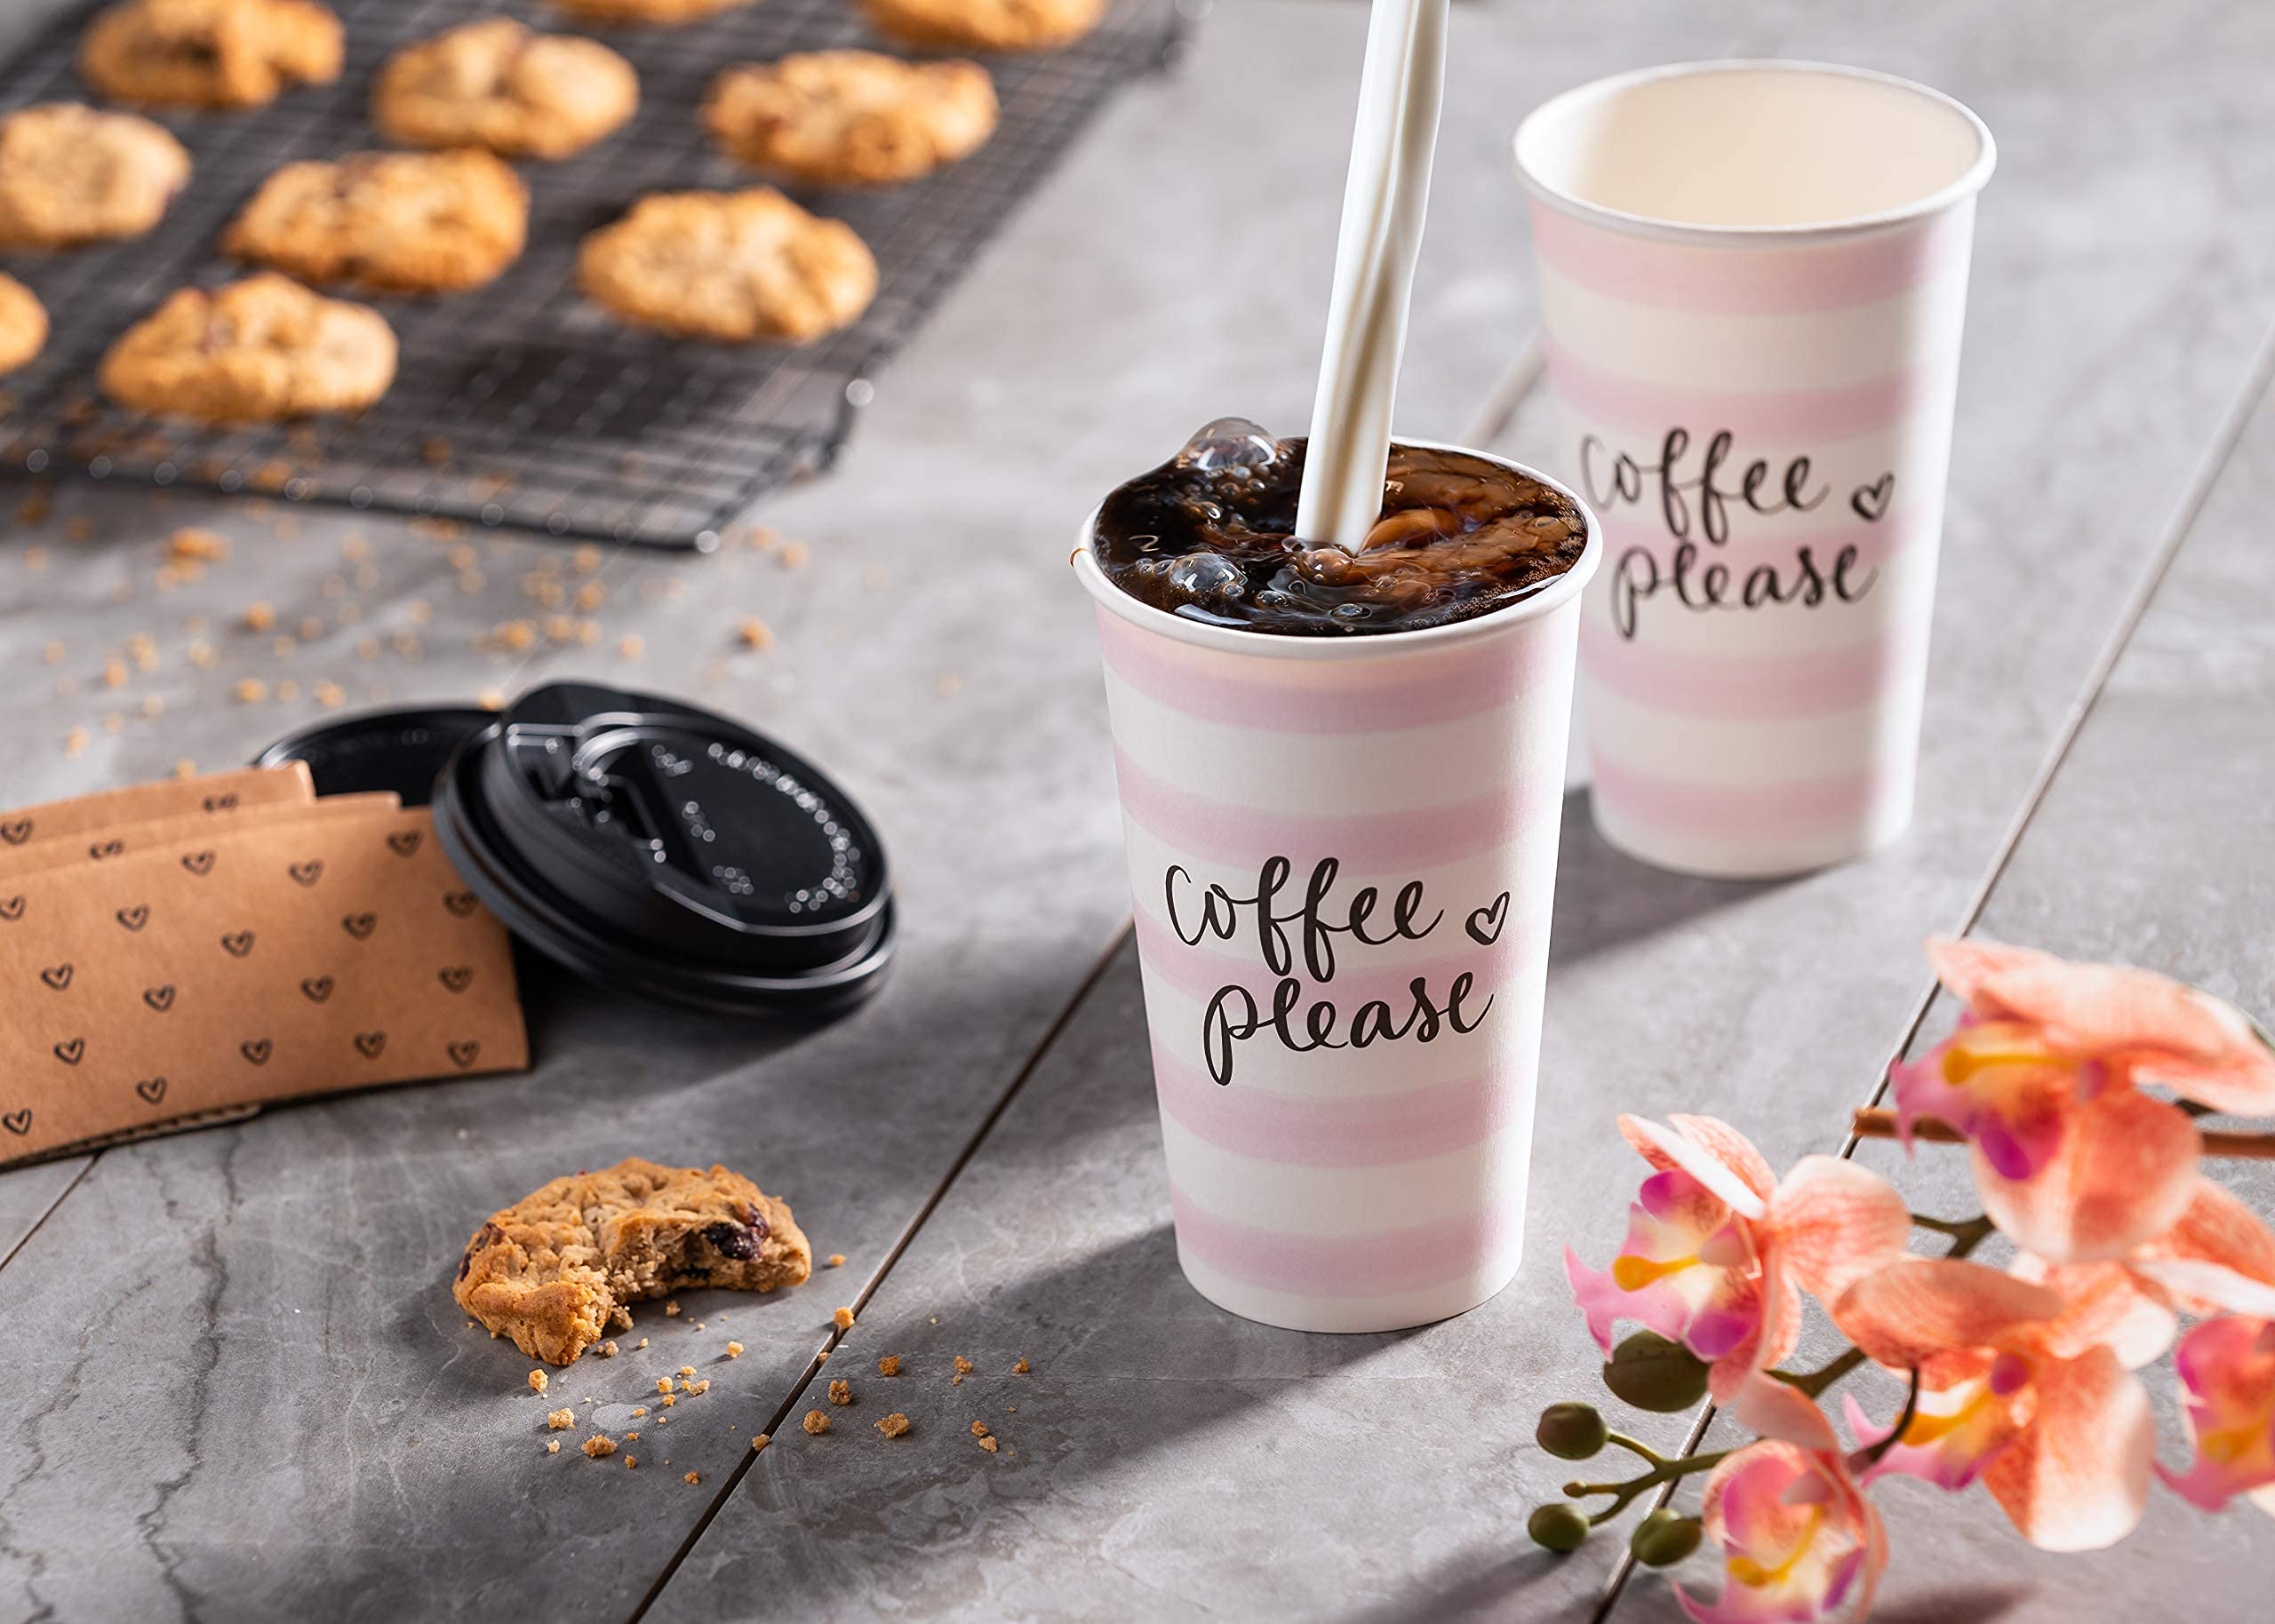 Paper To Go Cups for Hot/Cold Beverages